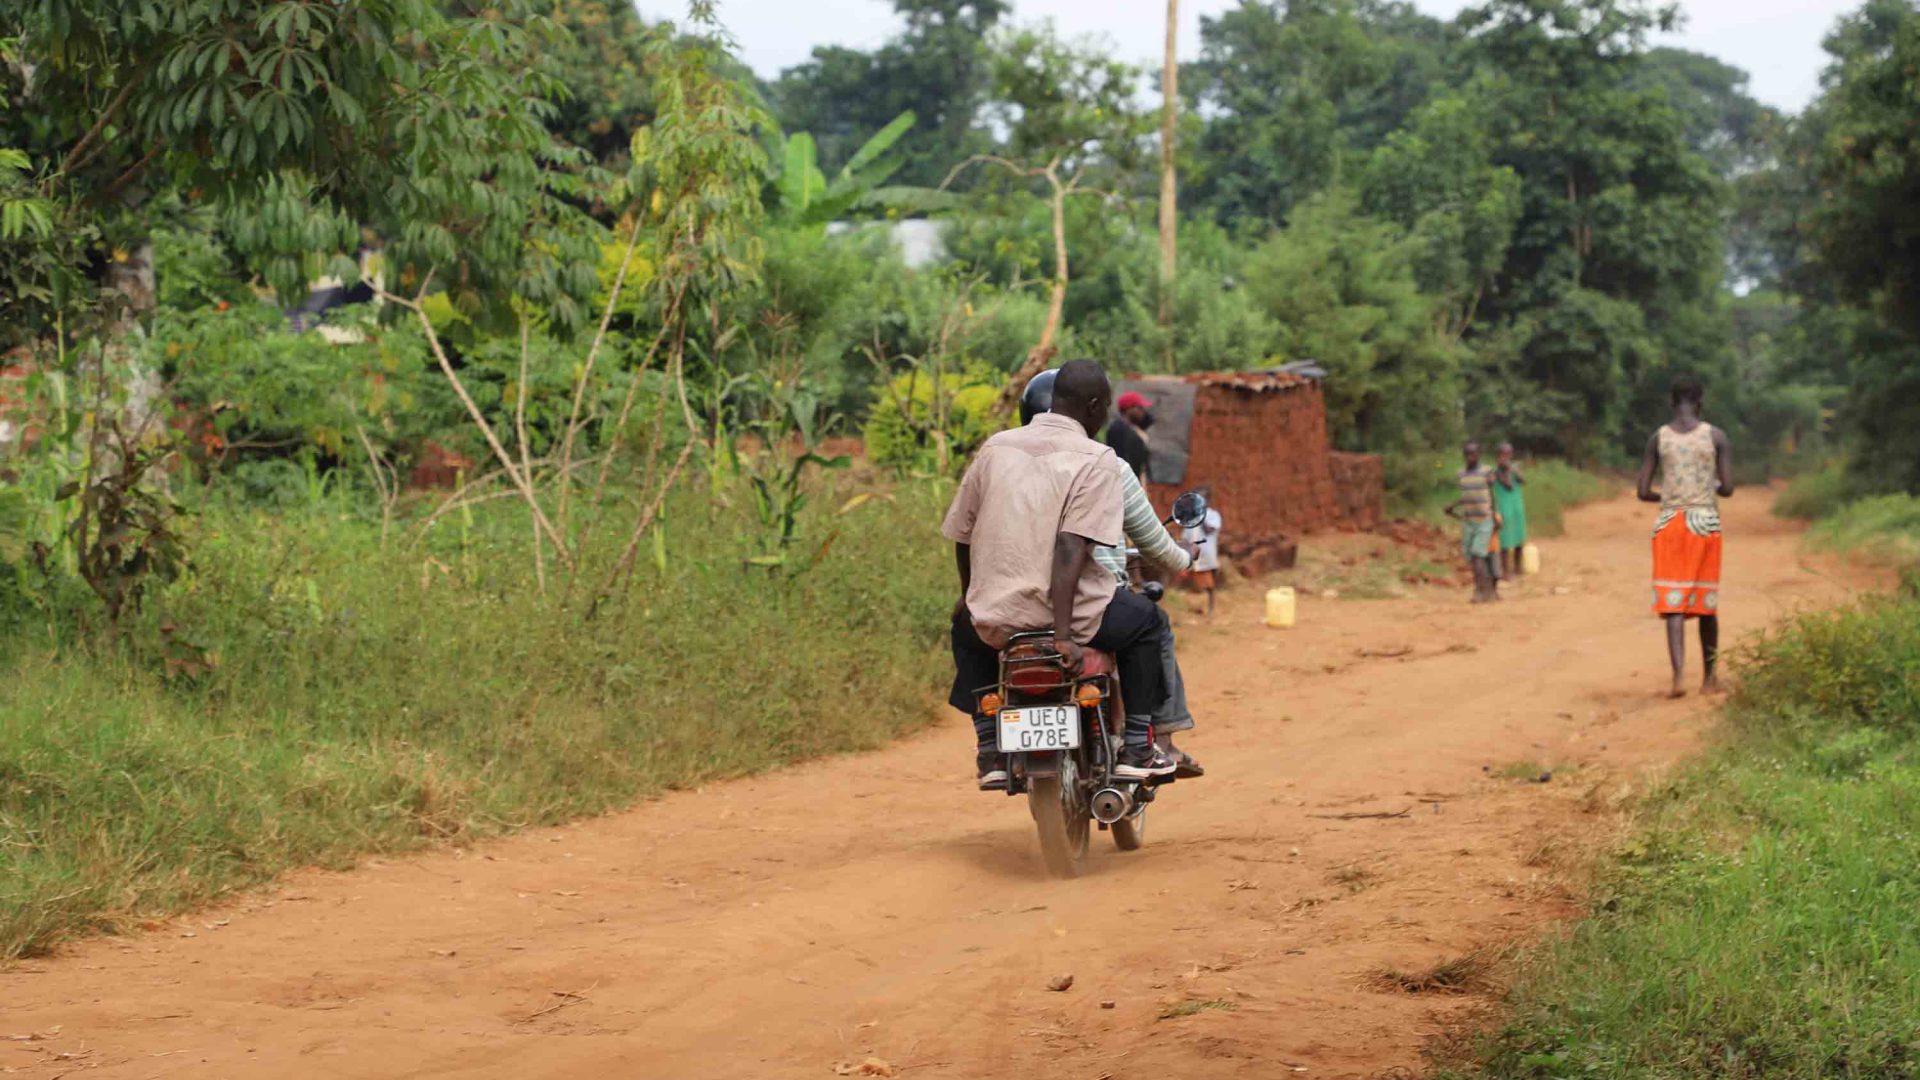 A motorcycle transports a passenger up a dusty road.